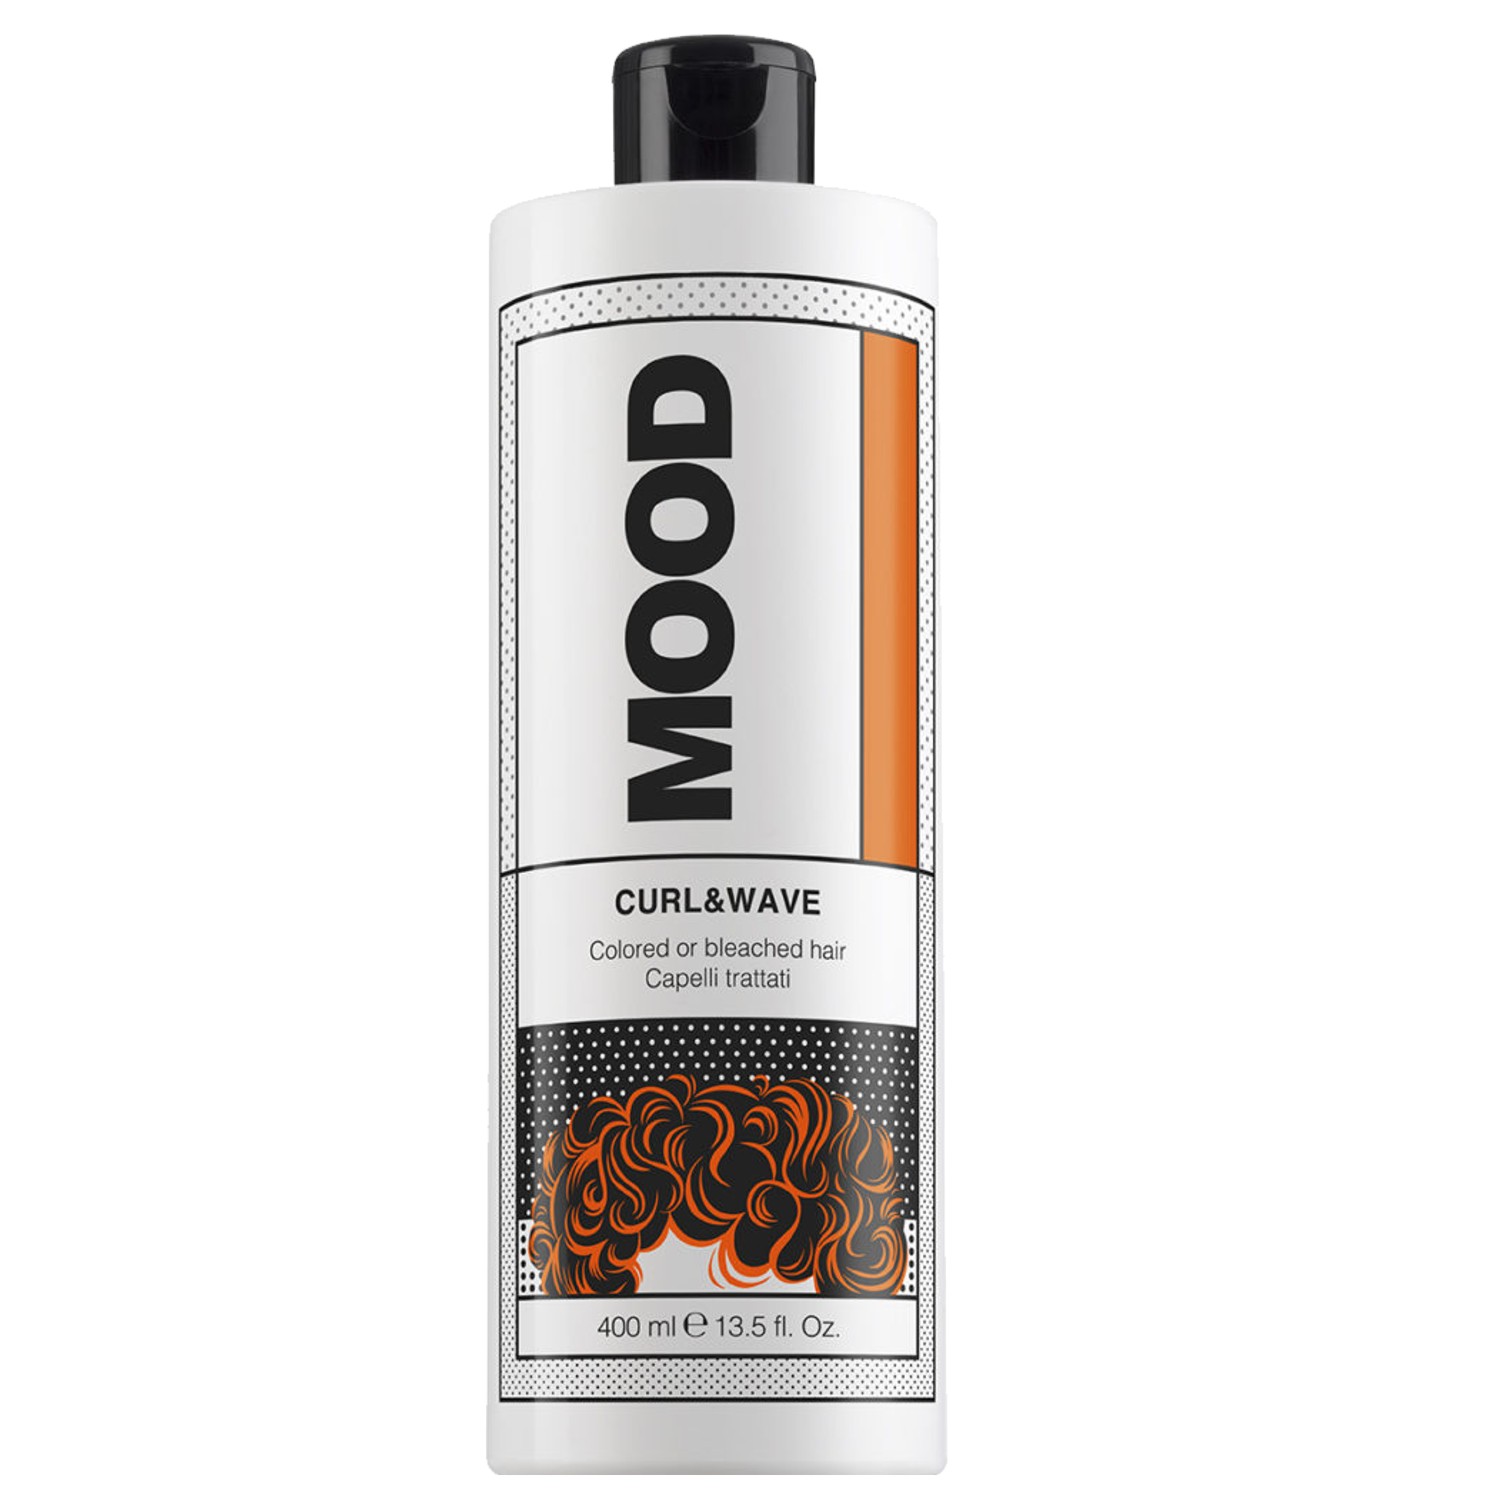 MOOD Curl & Wave Colored or Bleached Hair 400 ml